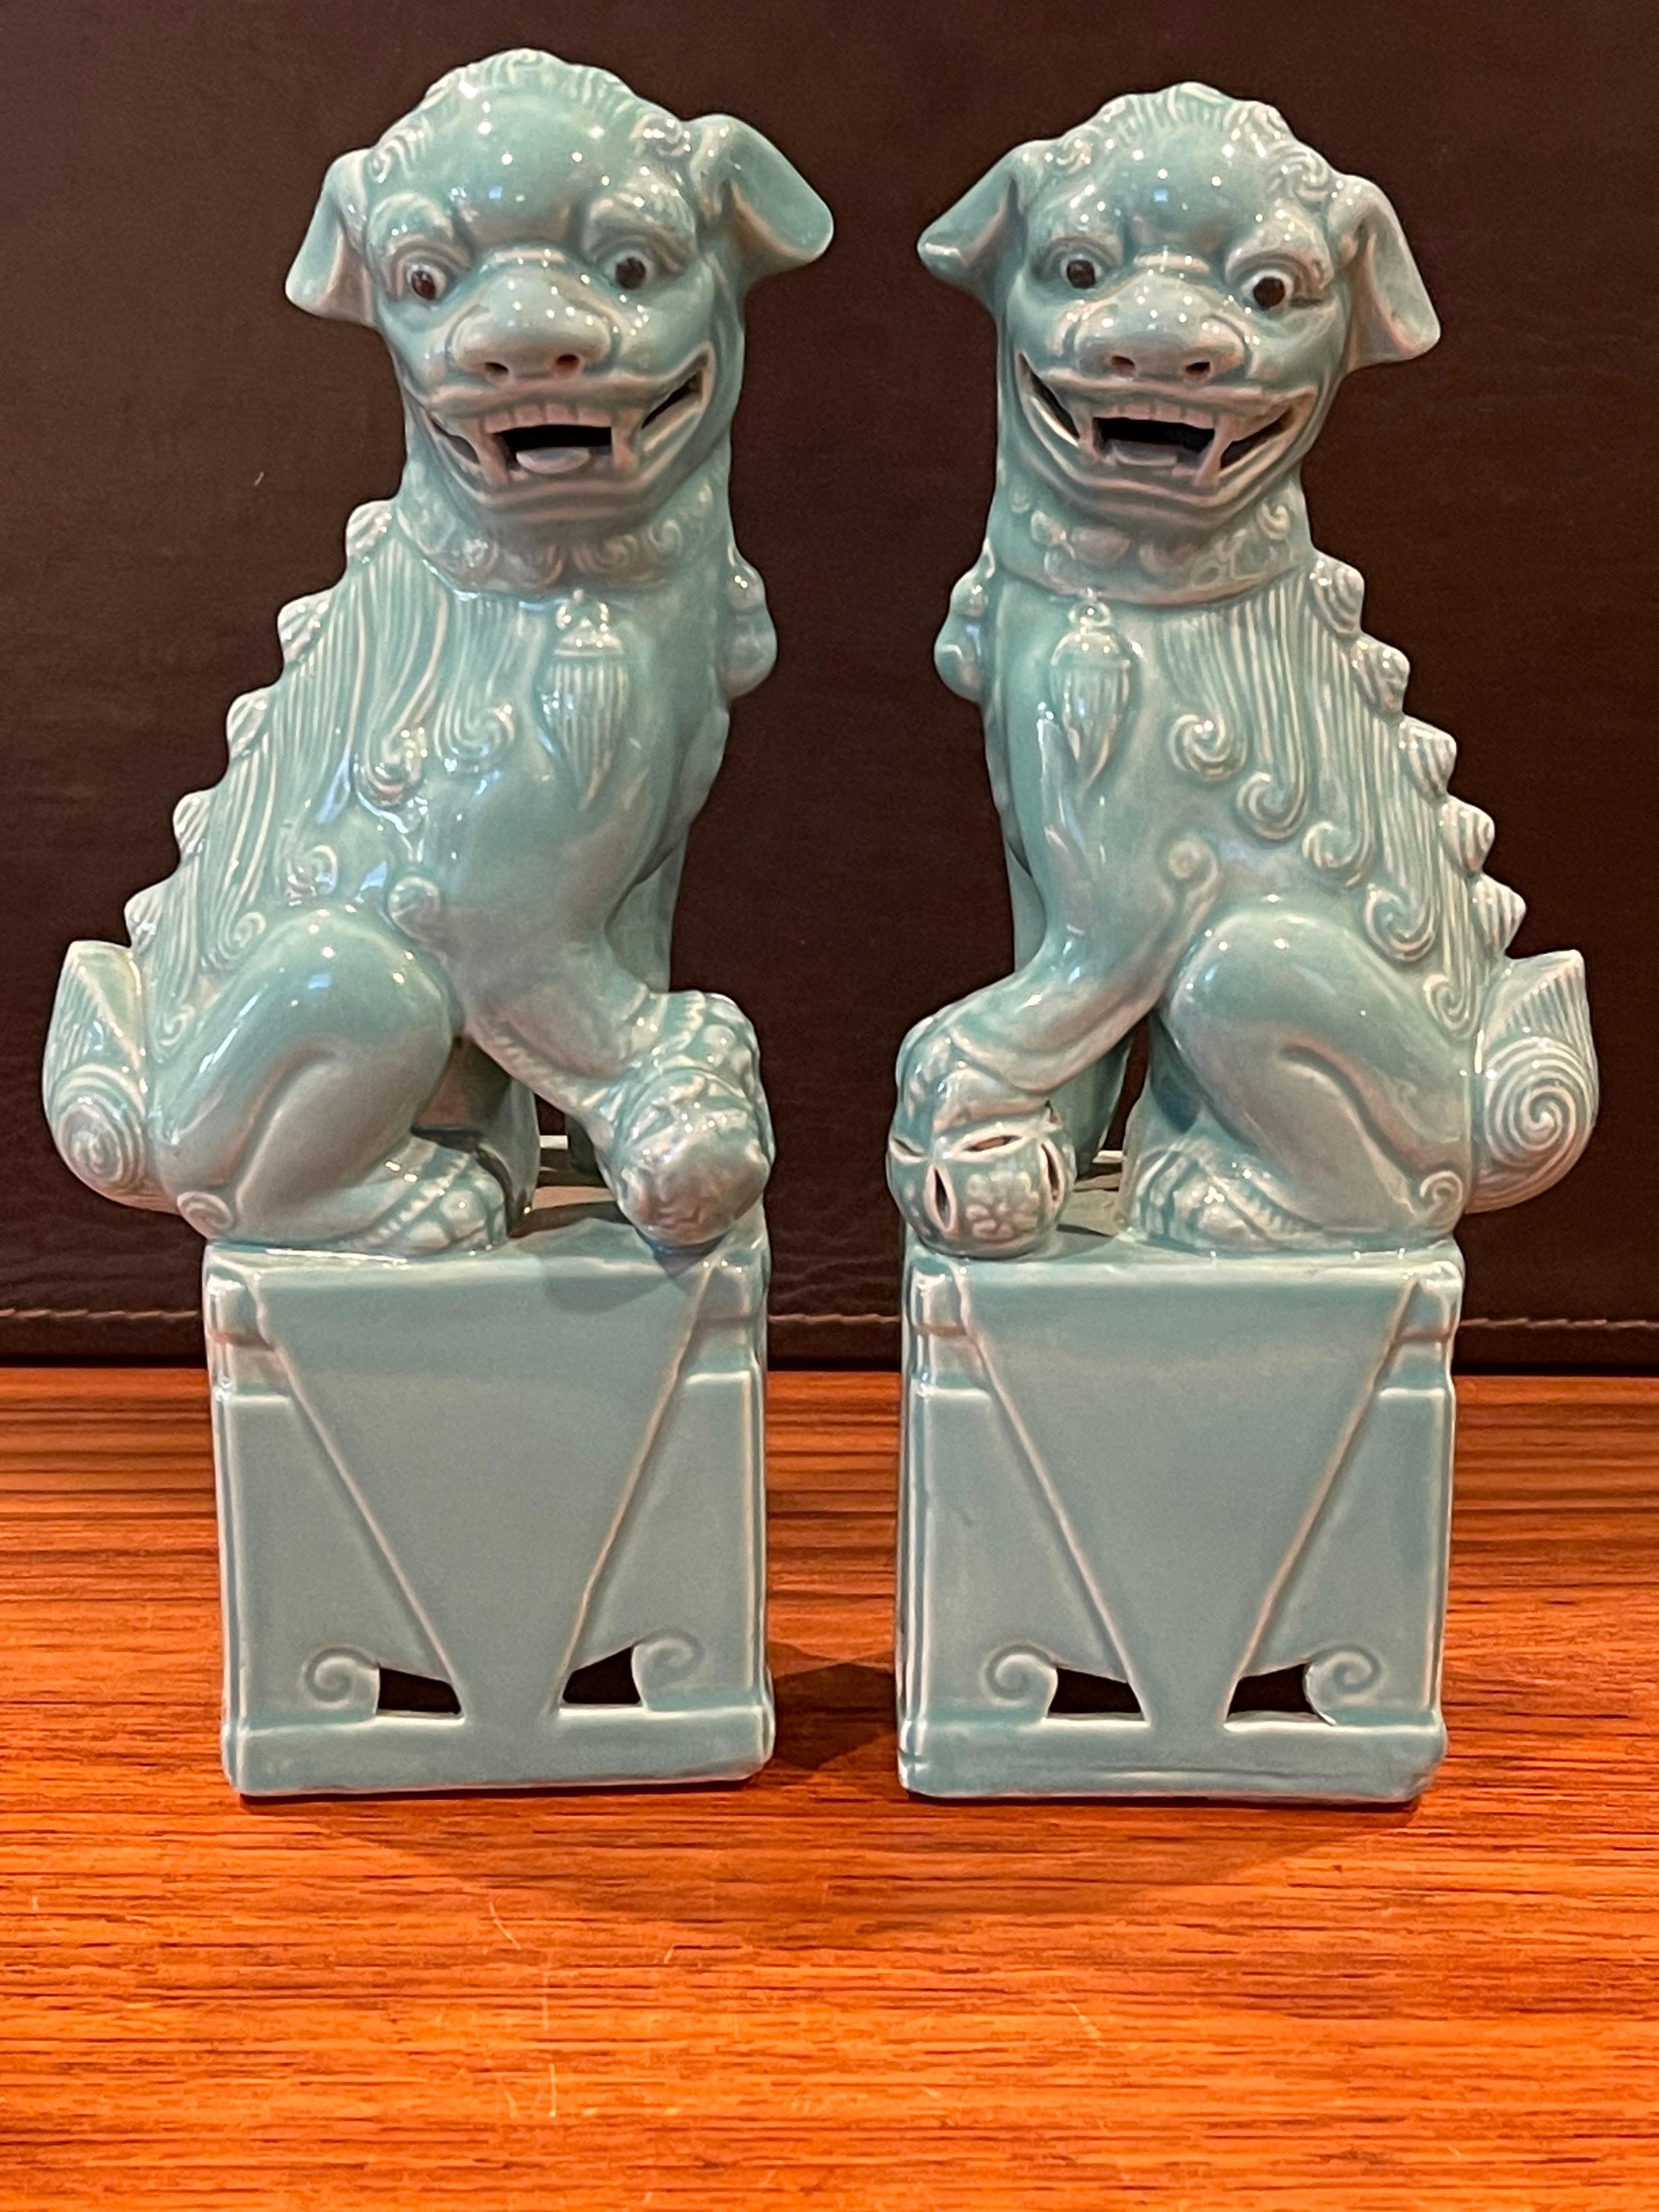 Pair of Midcentury Ceramic Foo Dogs / Bookends 1